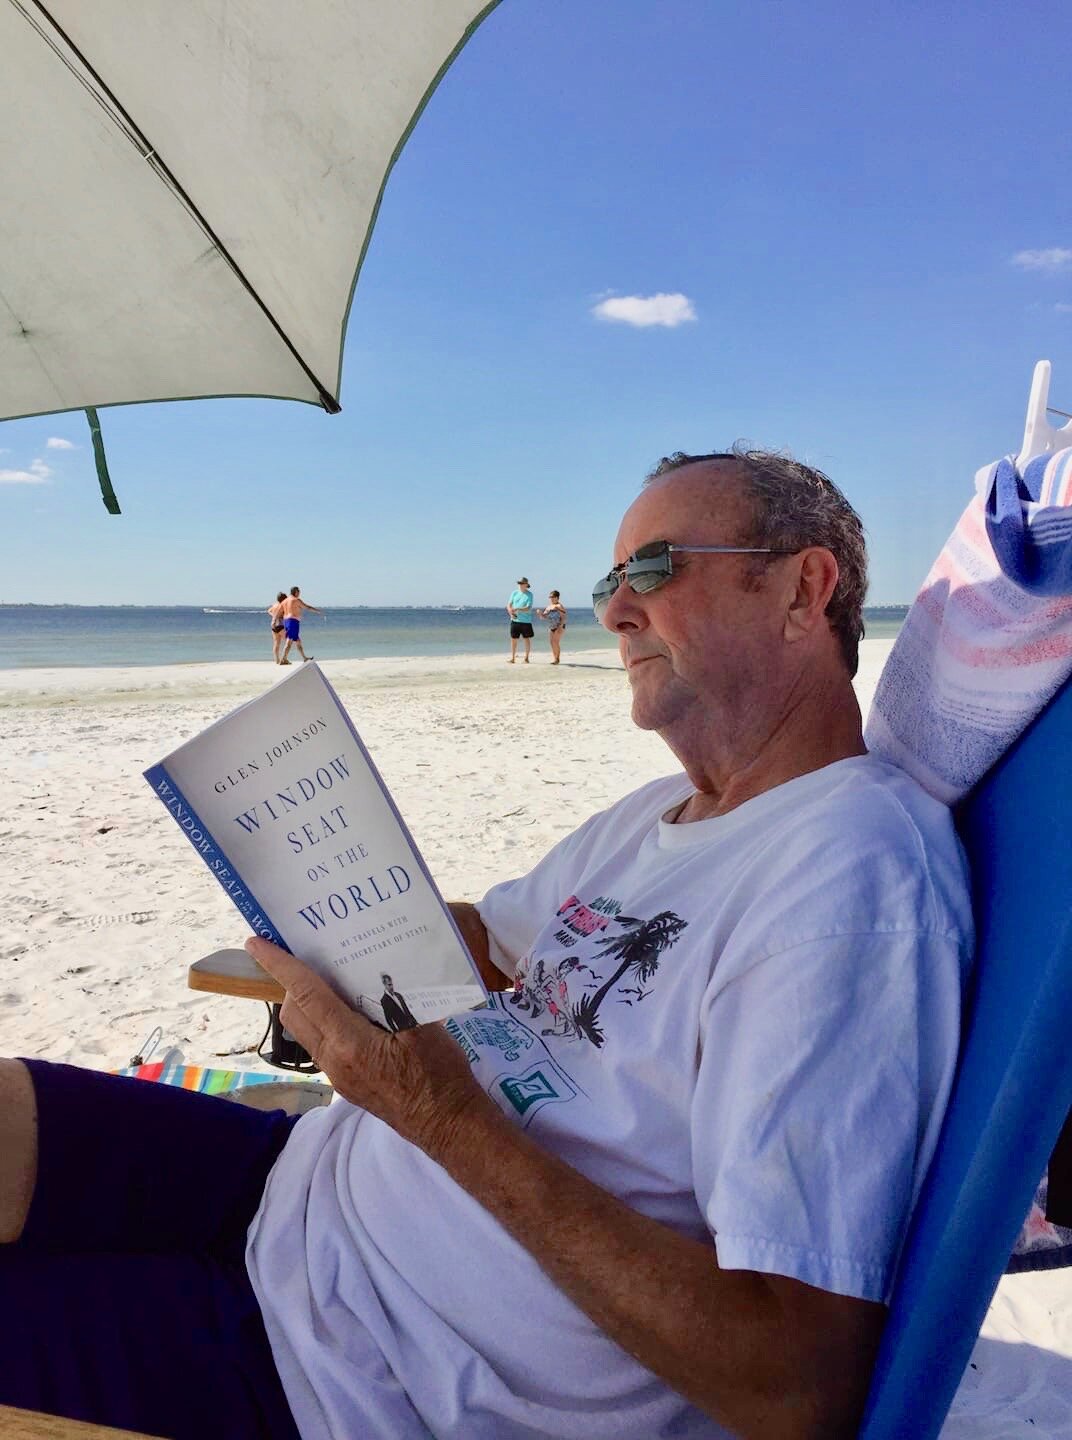  Former UMass Professor Frank Talty reads WSOTW on the beach in Fort Myers, Fla. 